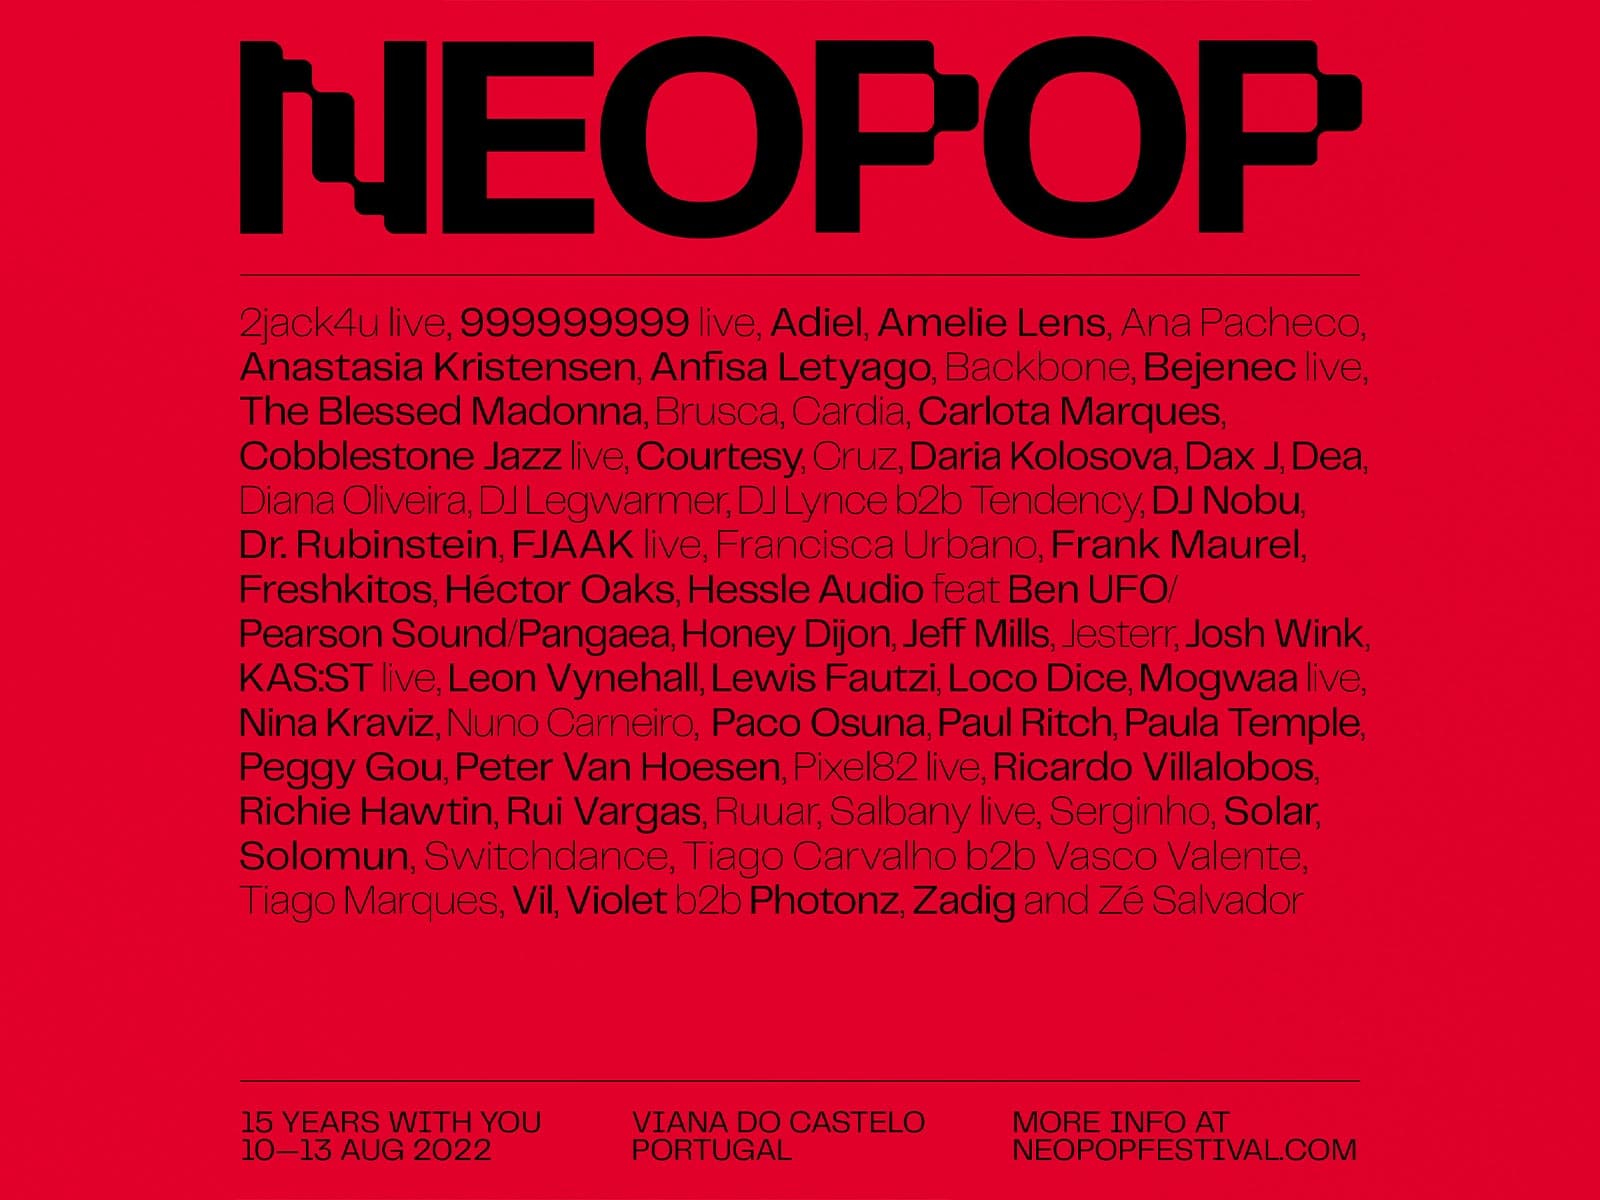 NEOPOP Festival returns to celebrate its 15th edition